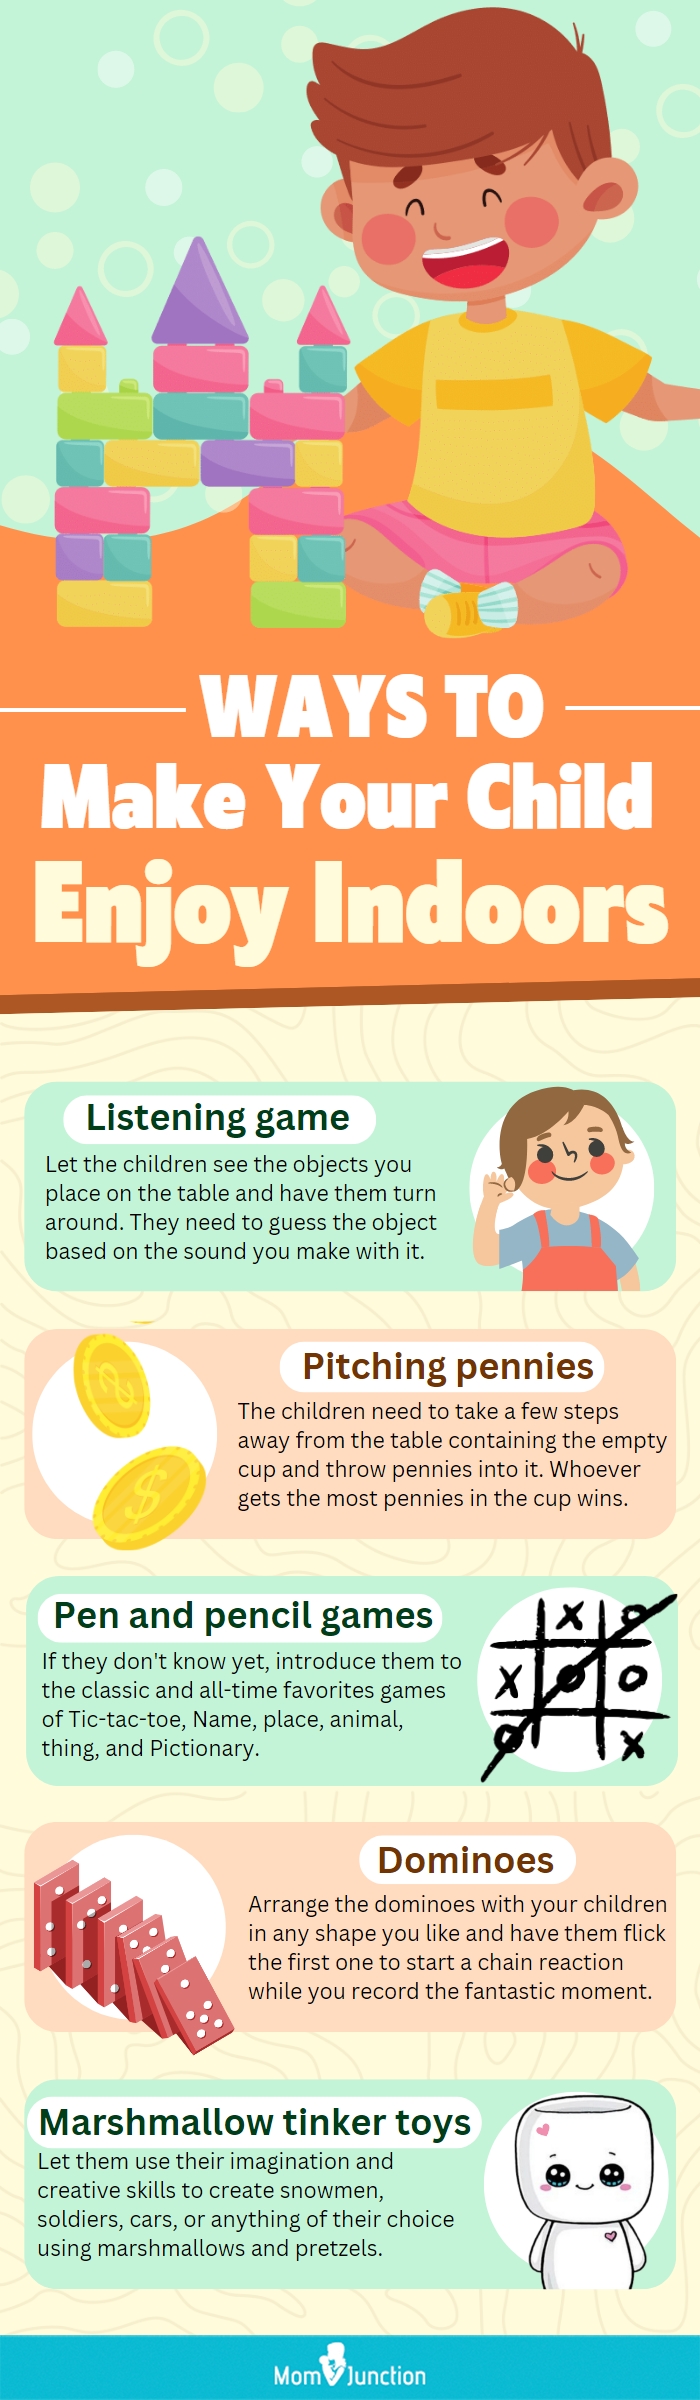 12 Family Games You Can Play Without Needing Any Equipment